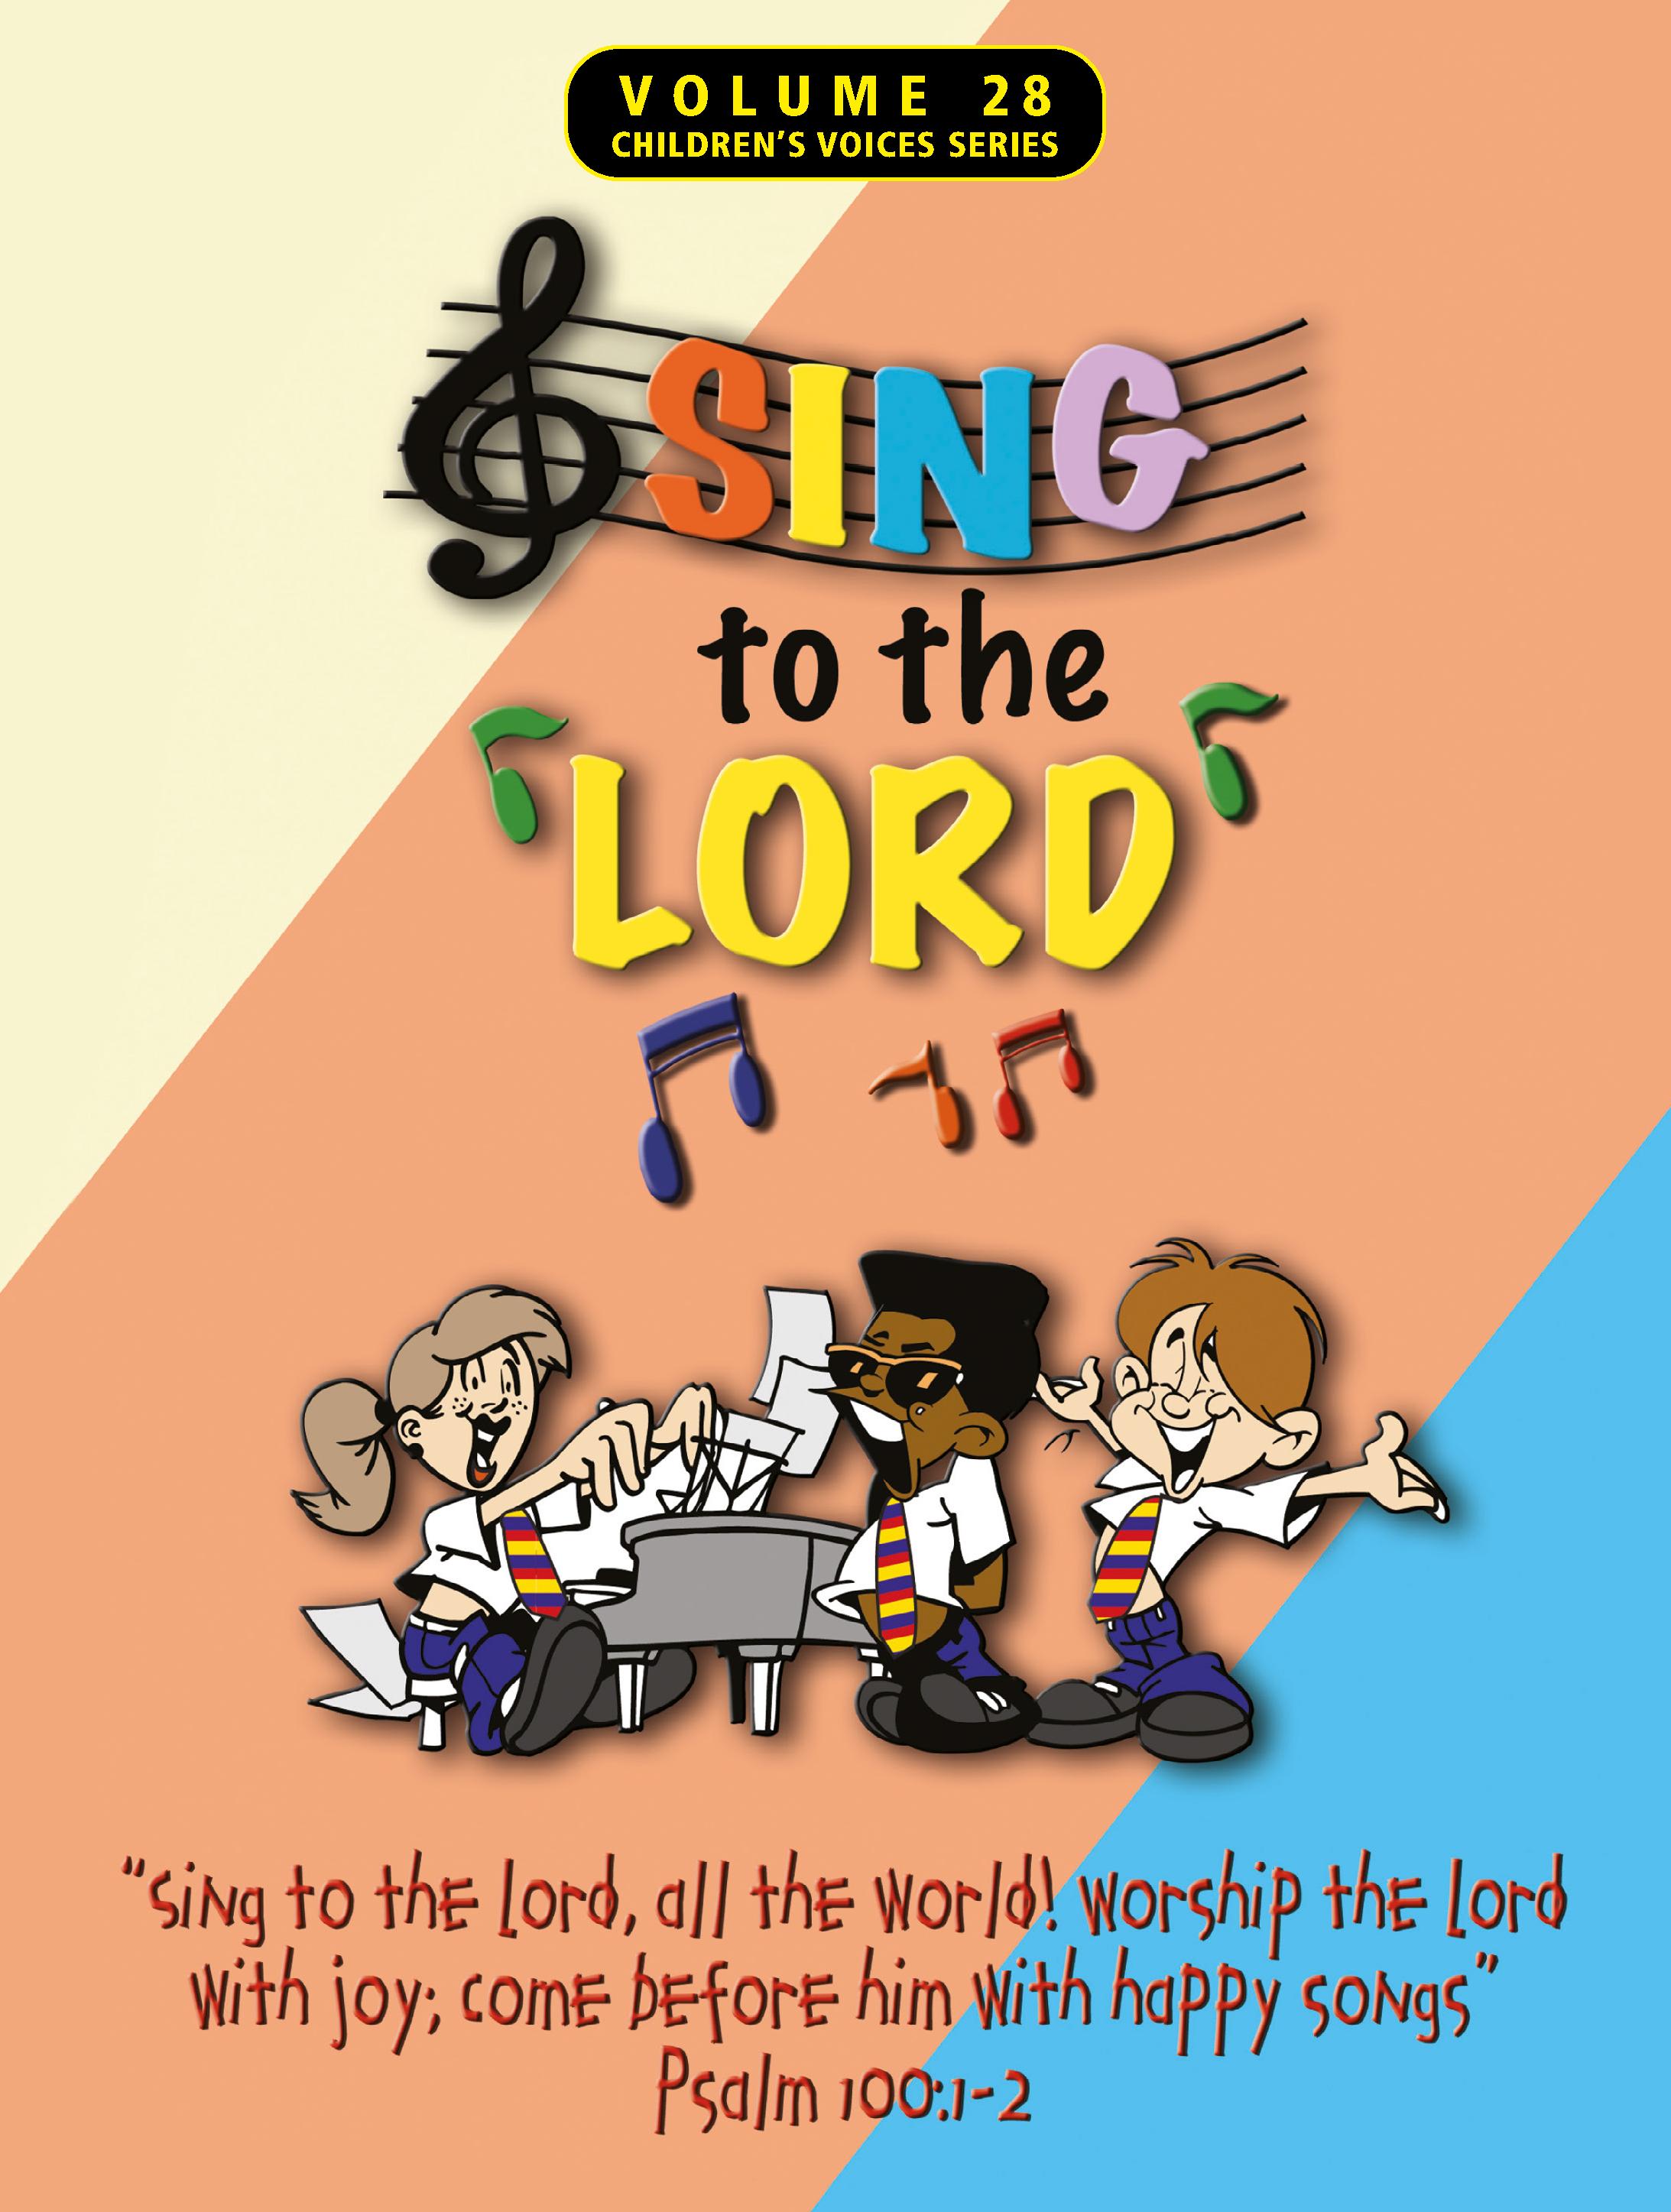 Sing to the Lord, Children's Voices Series, Volume 28